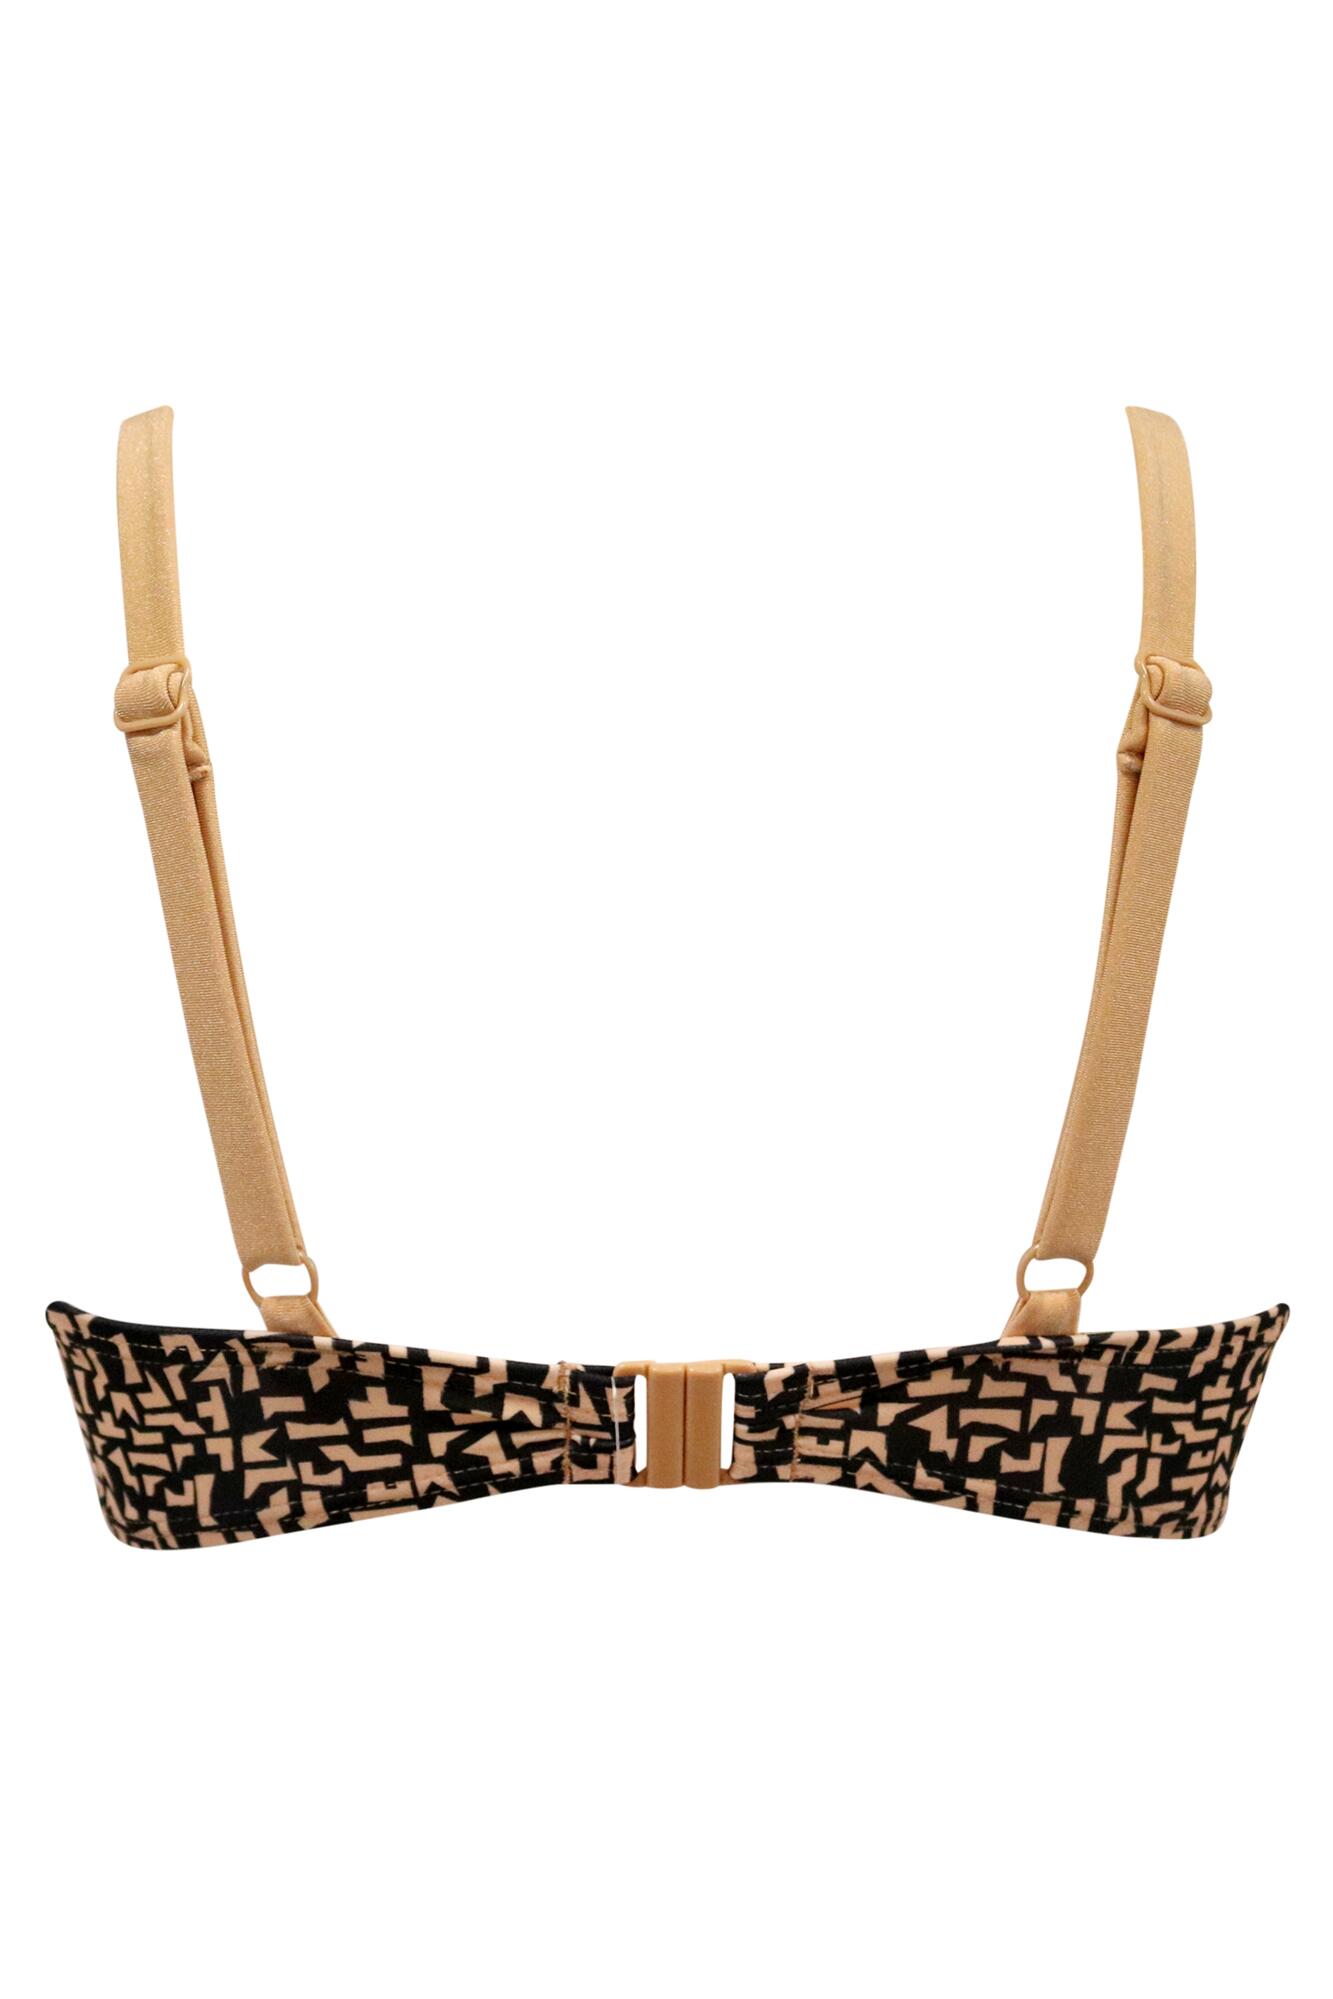 Allure Clothing (Mosta) - SOLD OUT Exotic. B Cup swimsuit with removable  pad for higher comfort. Fix back crossed straps with triple tone elastics.  Gold, terra-cotta and black will mold the perfect